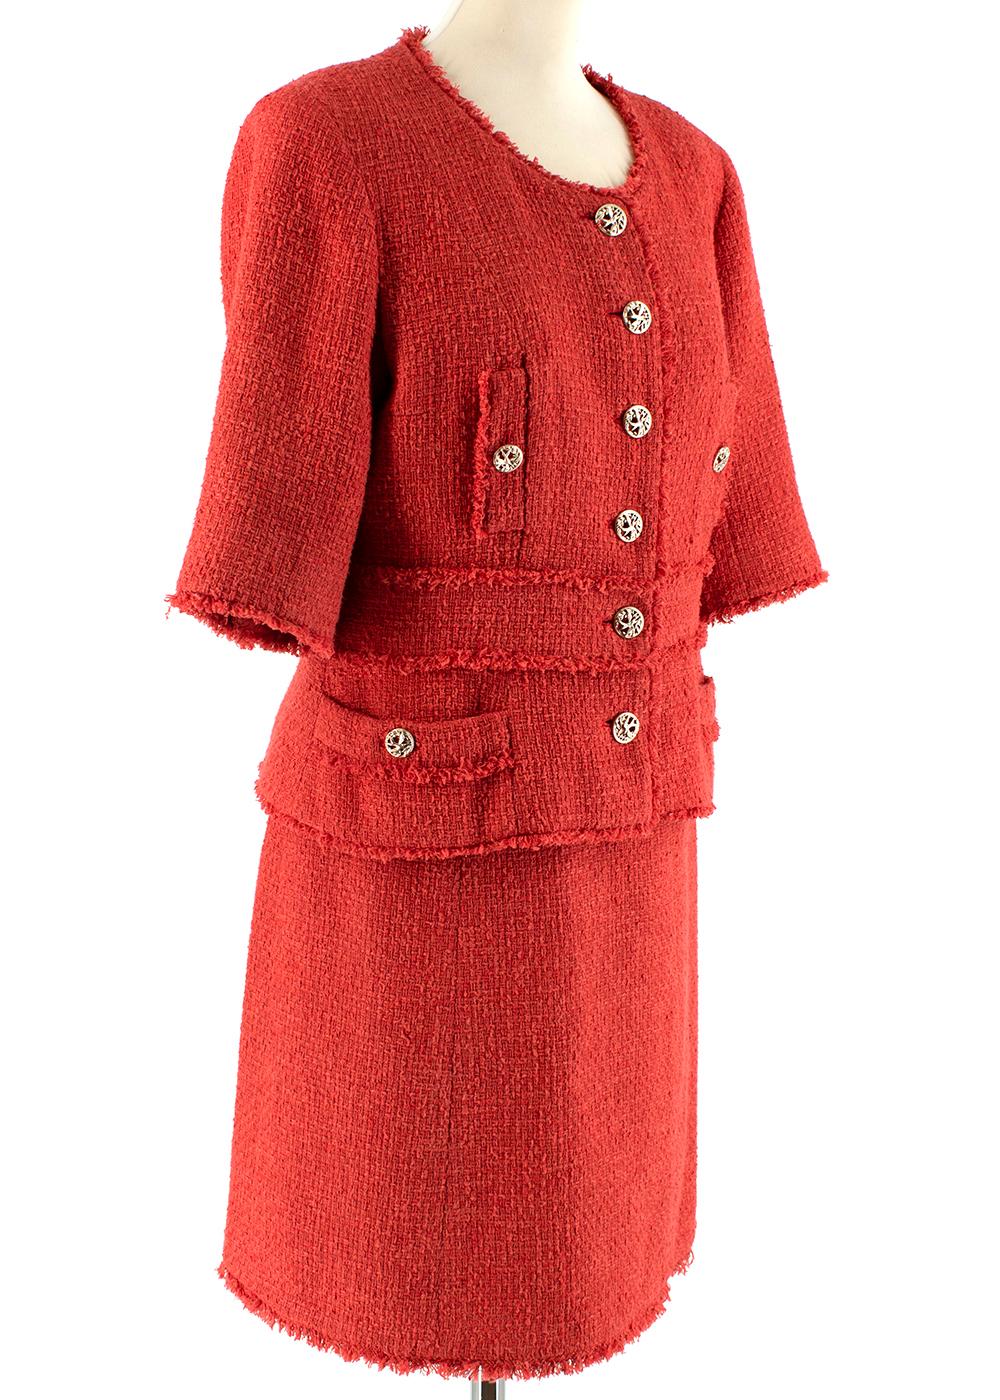 Chanel Red Cotton Blend Tweed Collarless Skirt Suit

-Made of a soft cotton blend 
-Signature tweed texture
-Classic single breasted cut
-Branded gold tone metal buttons depicting birds
-Beautiful fringed effect trims 
-Luxurious silk lining,